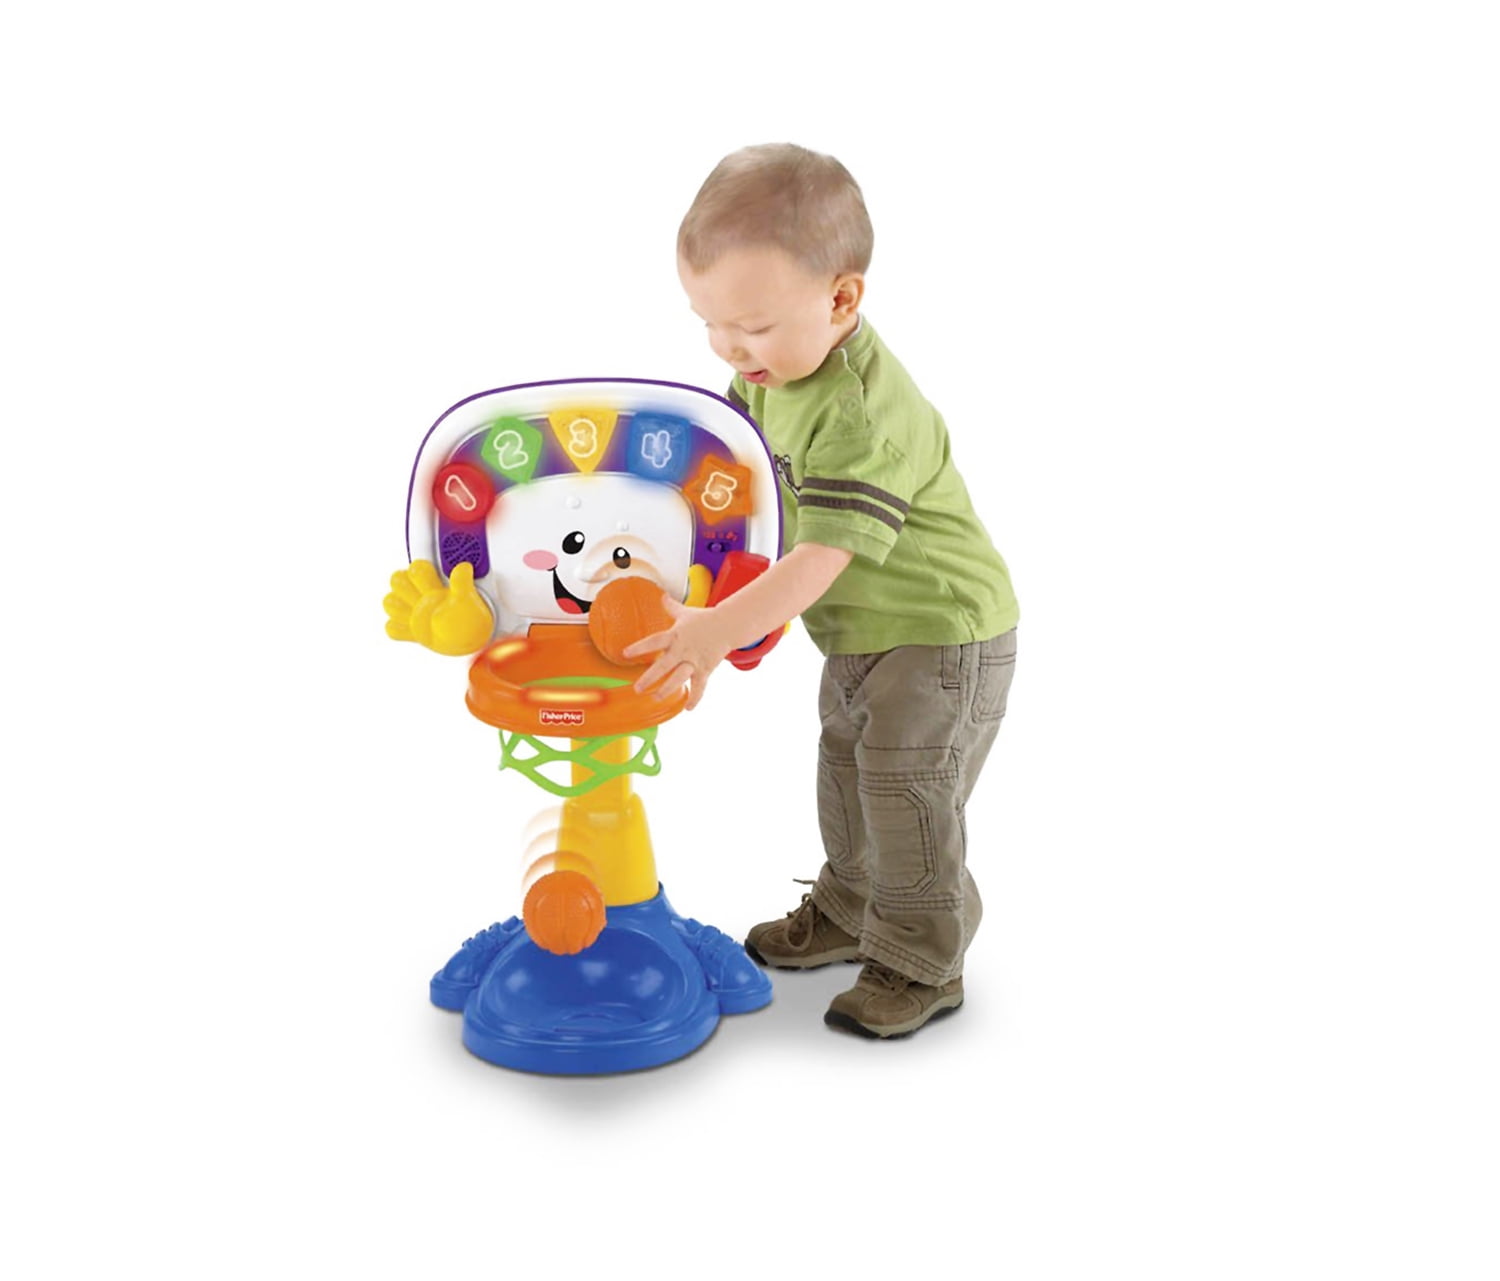 fisher price laugh and learn basketball